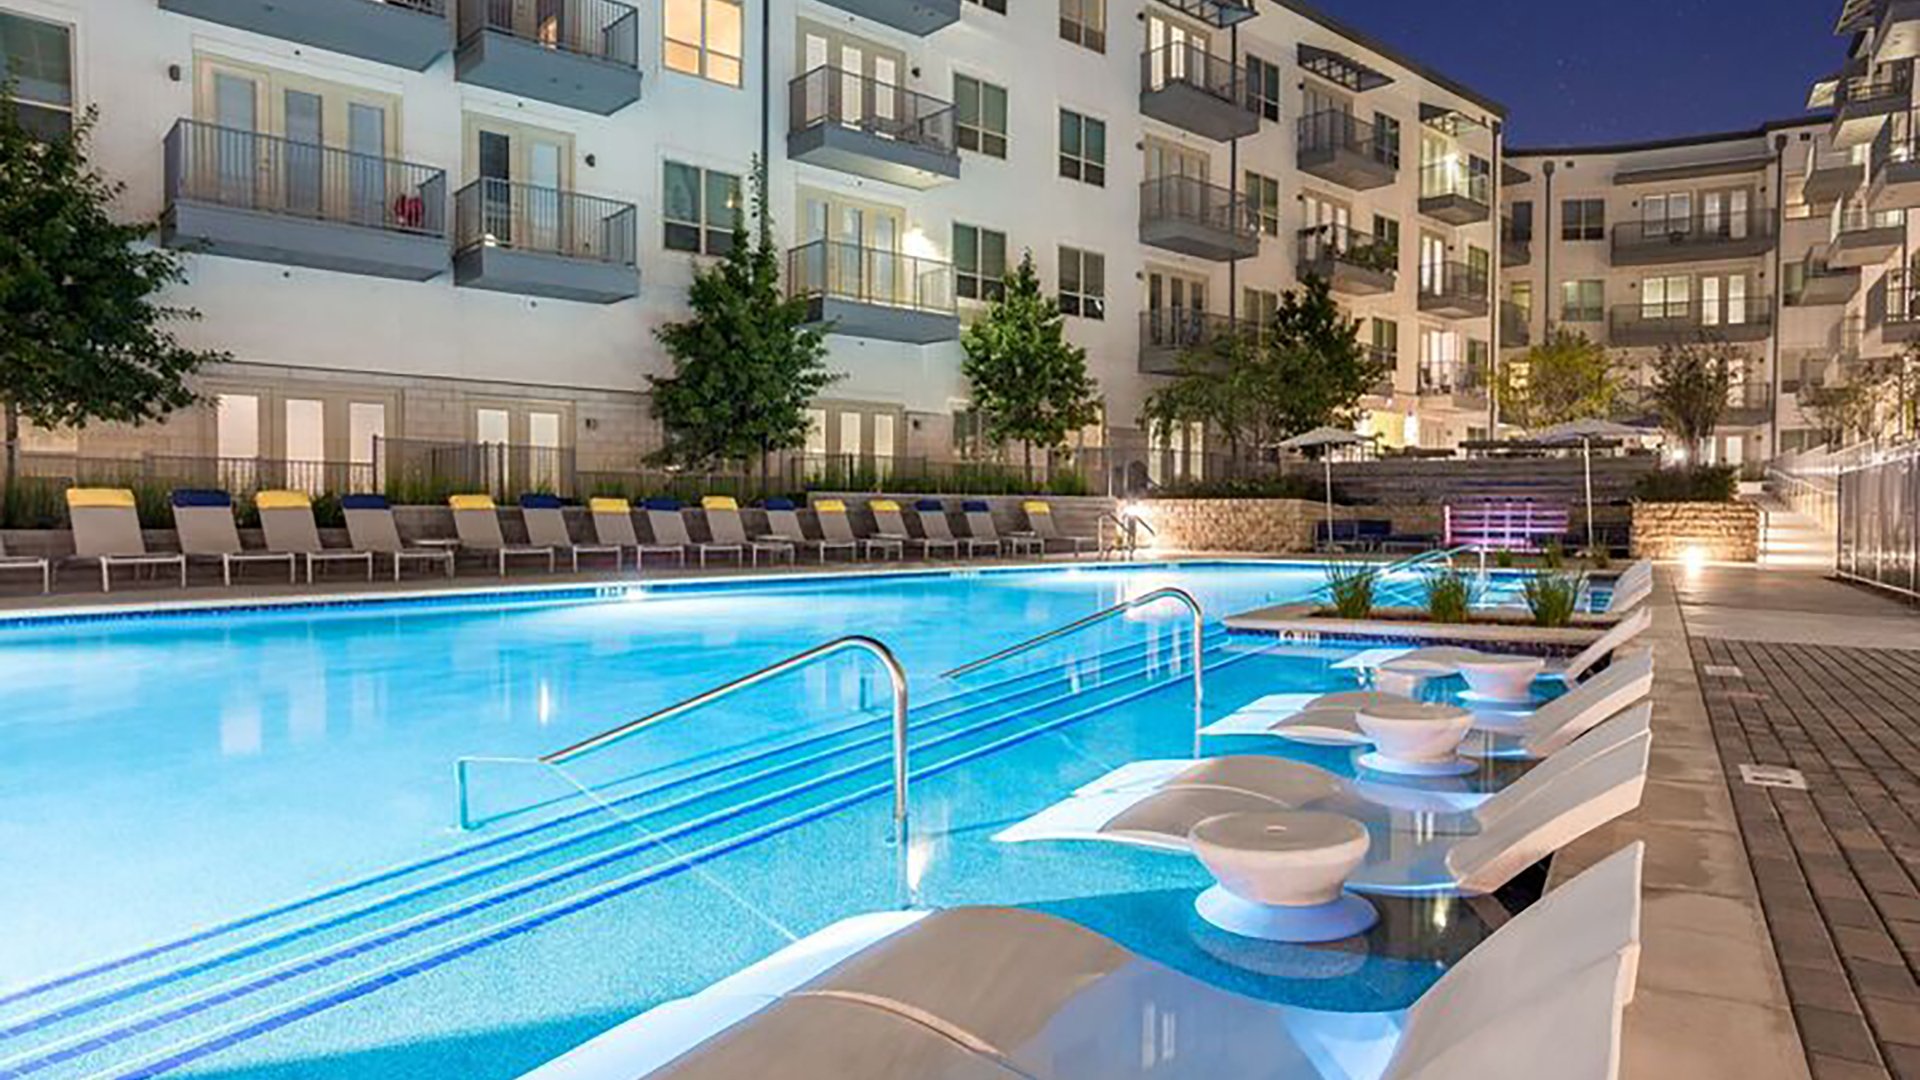 The outdoor pool at Crest at Las Colinas Station as seen from the tanning shelf at night. The apartment building surrounds the pool with green shrubs intermixed.